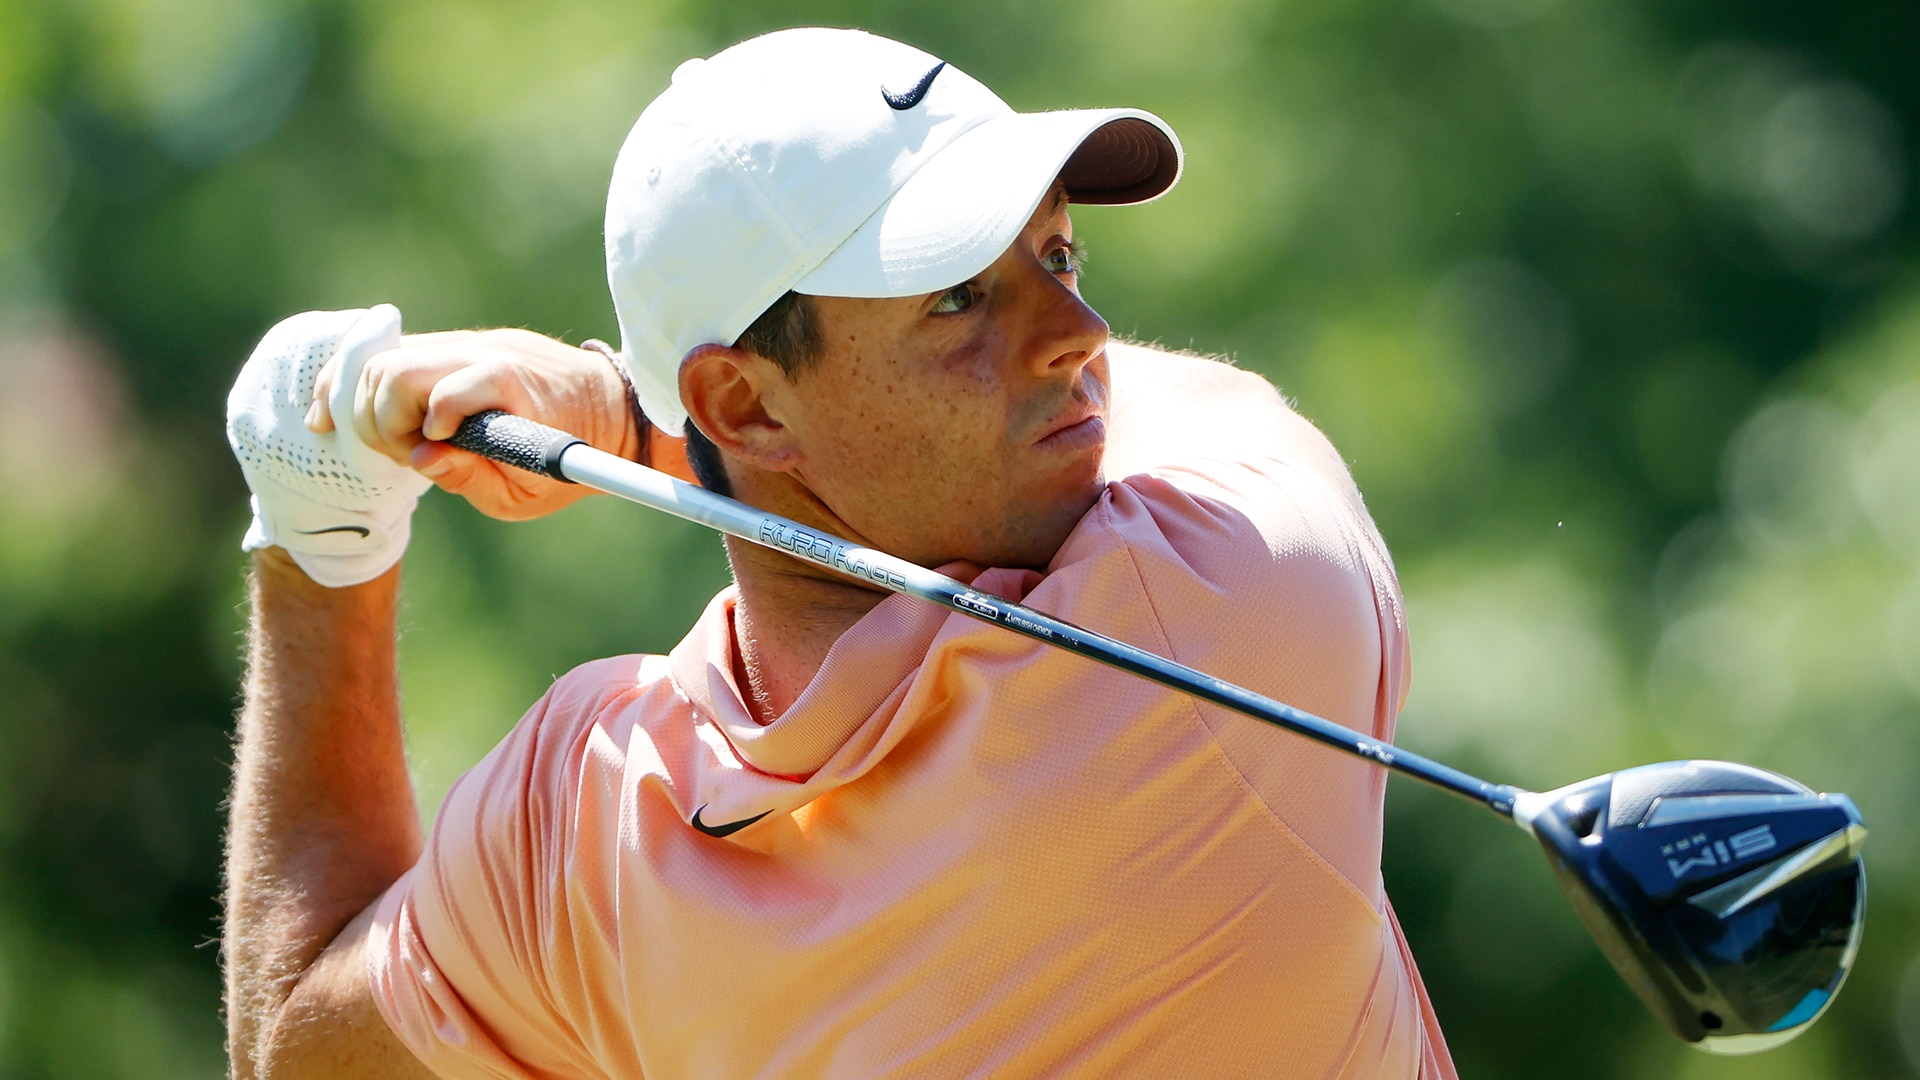 Rory McIlroy’s poor Sunday results in an impressive streak snapped